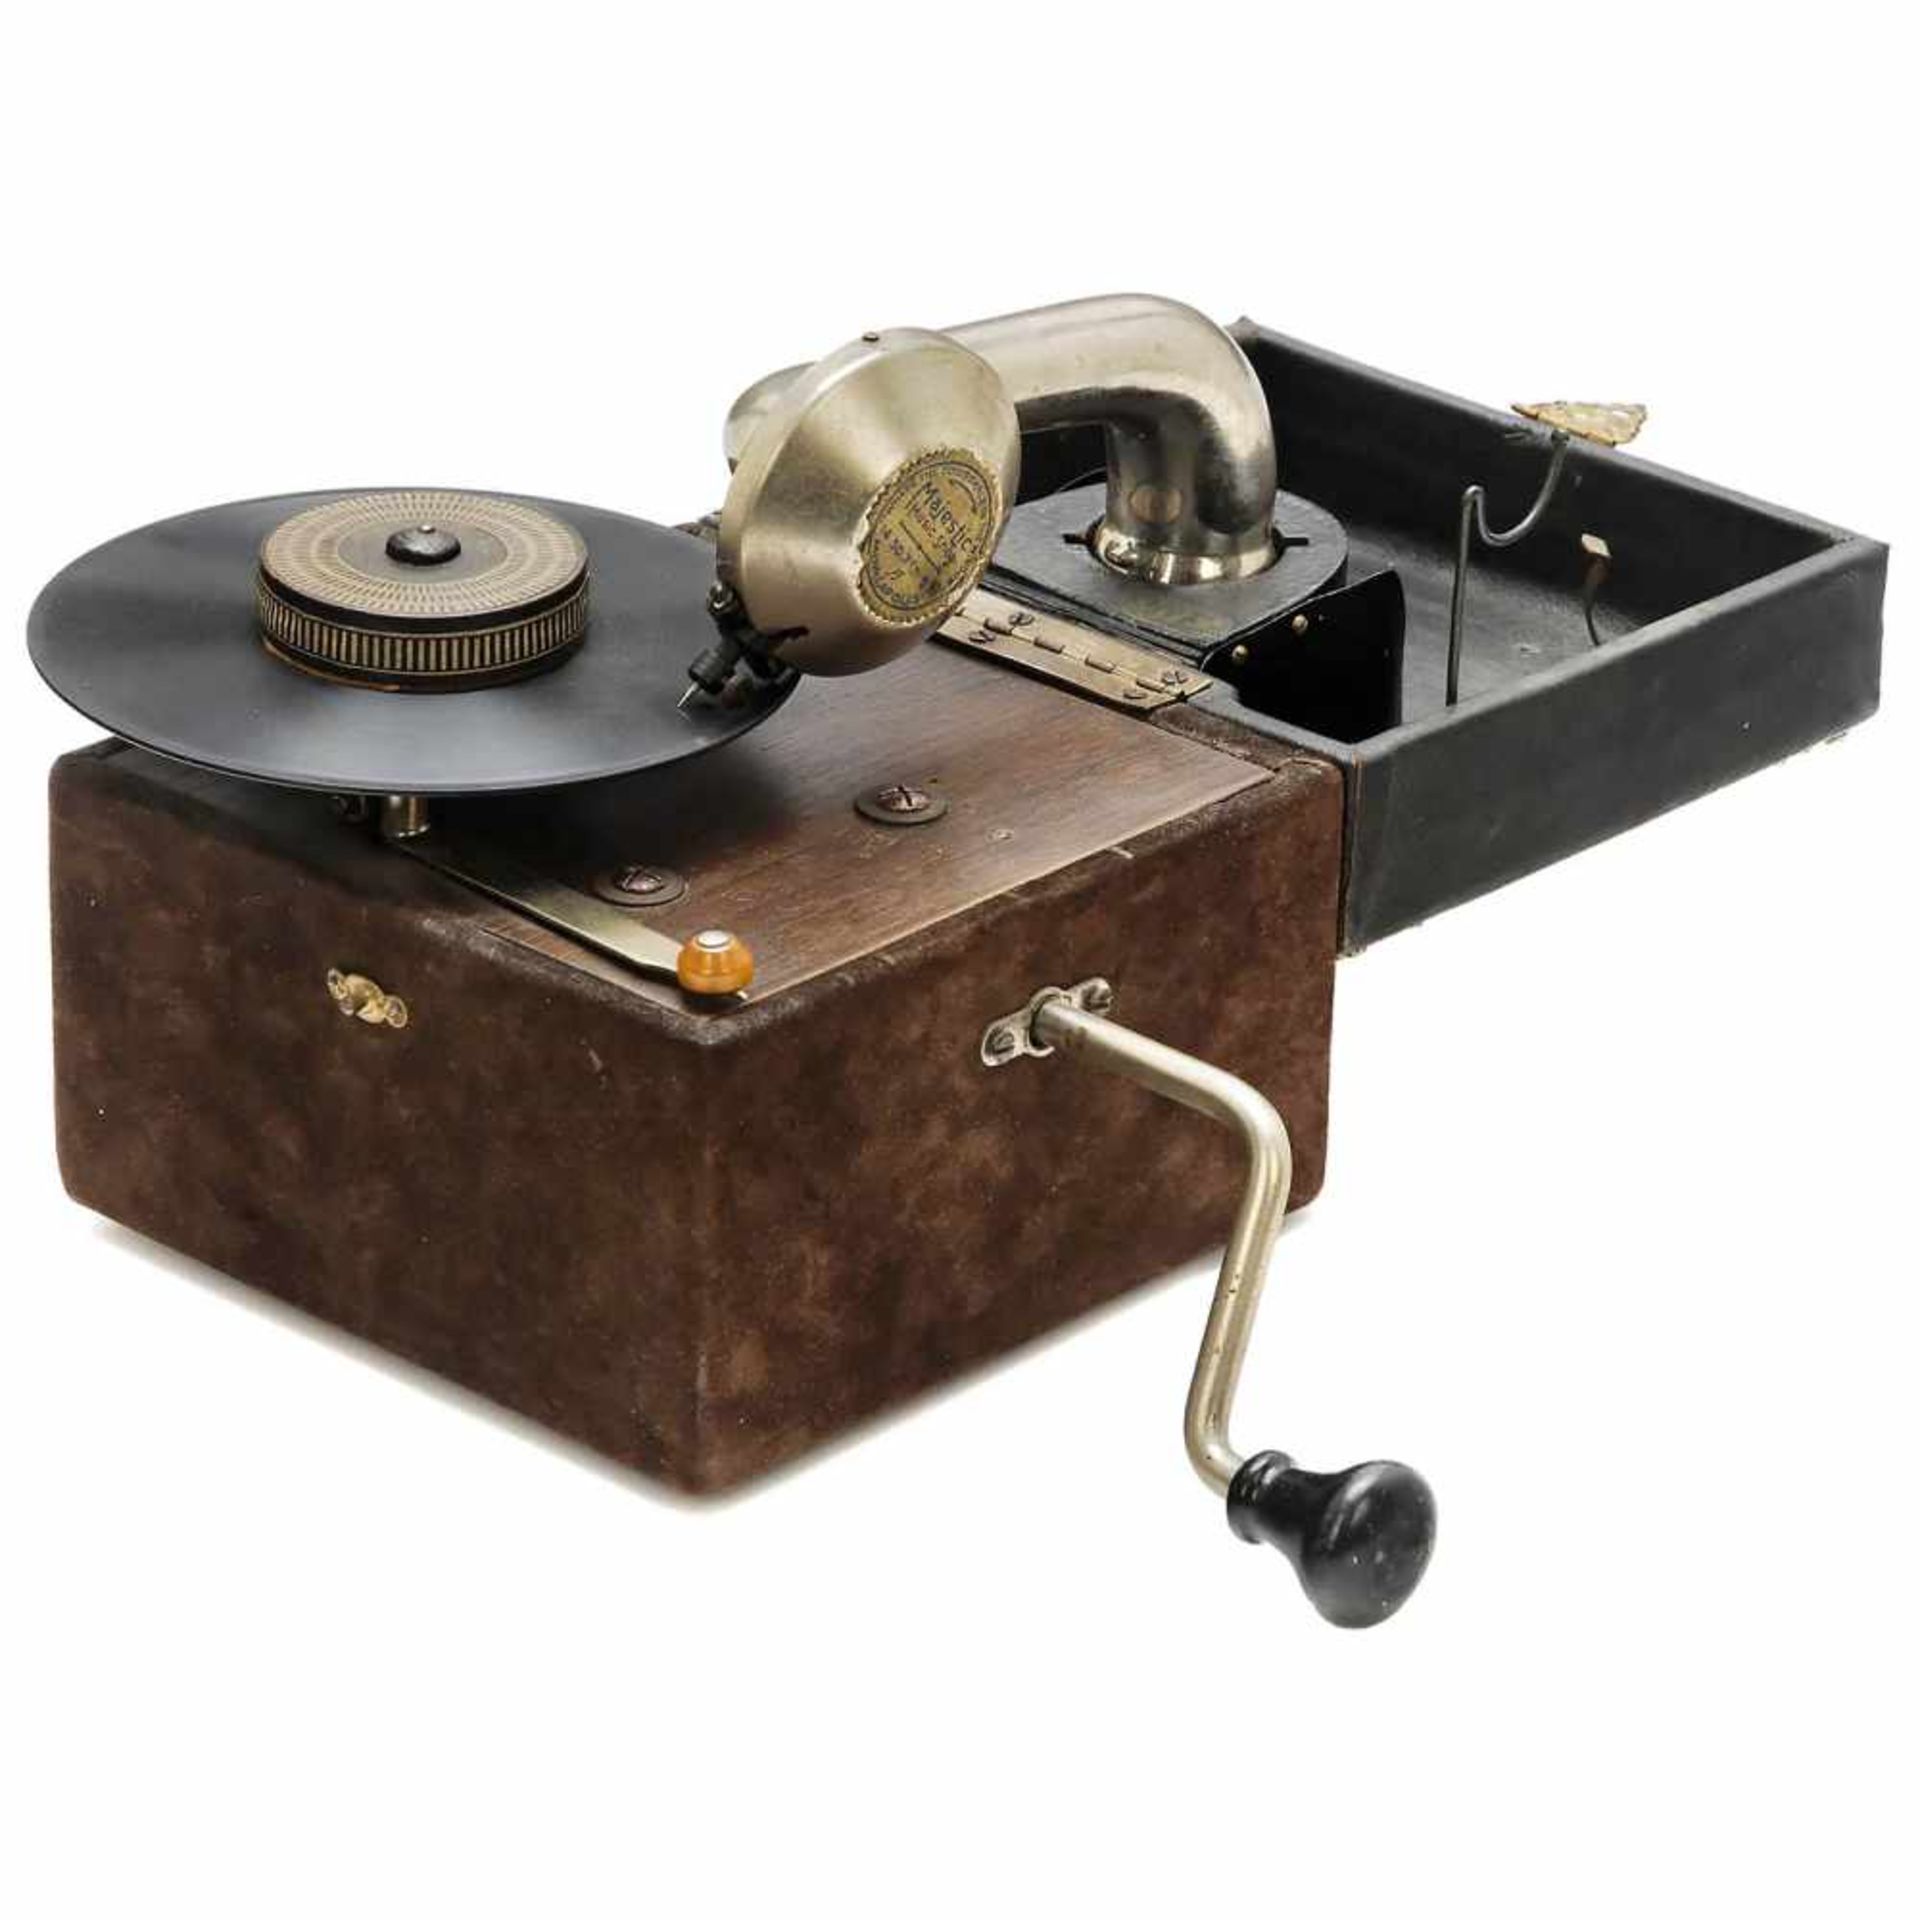 Pet-O-Fone Portable Gramophone, c. 1925A very curious construction, with additional horn. With an - Bild 2 aus 3